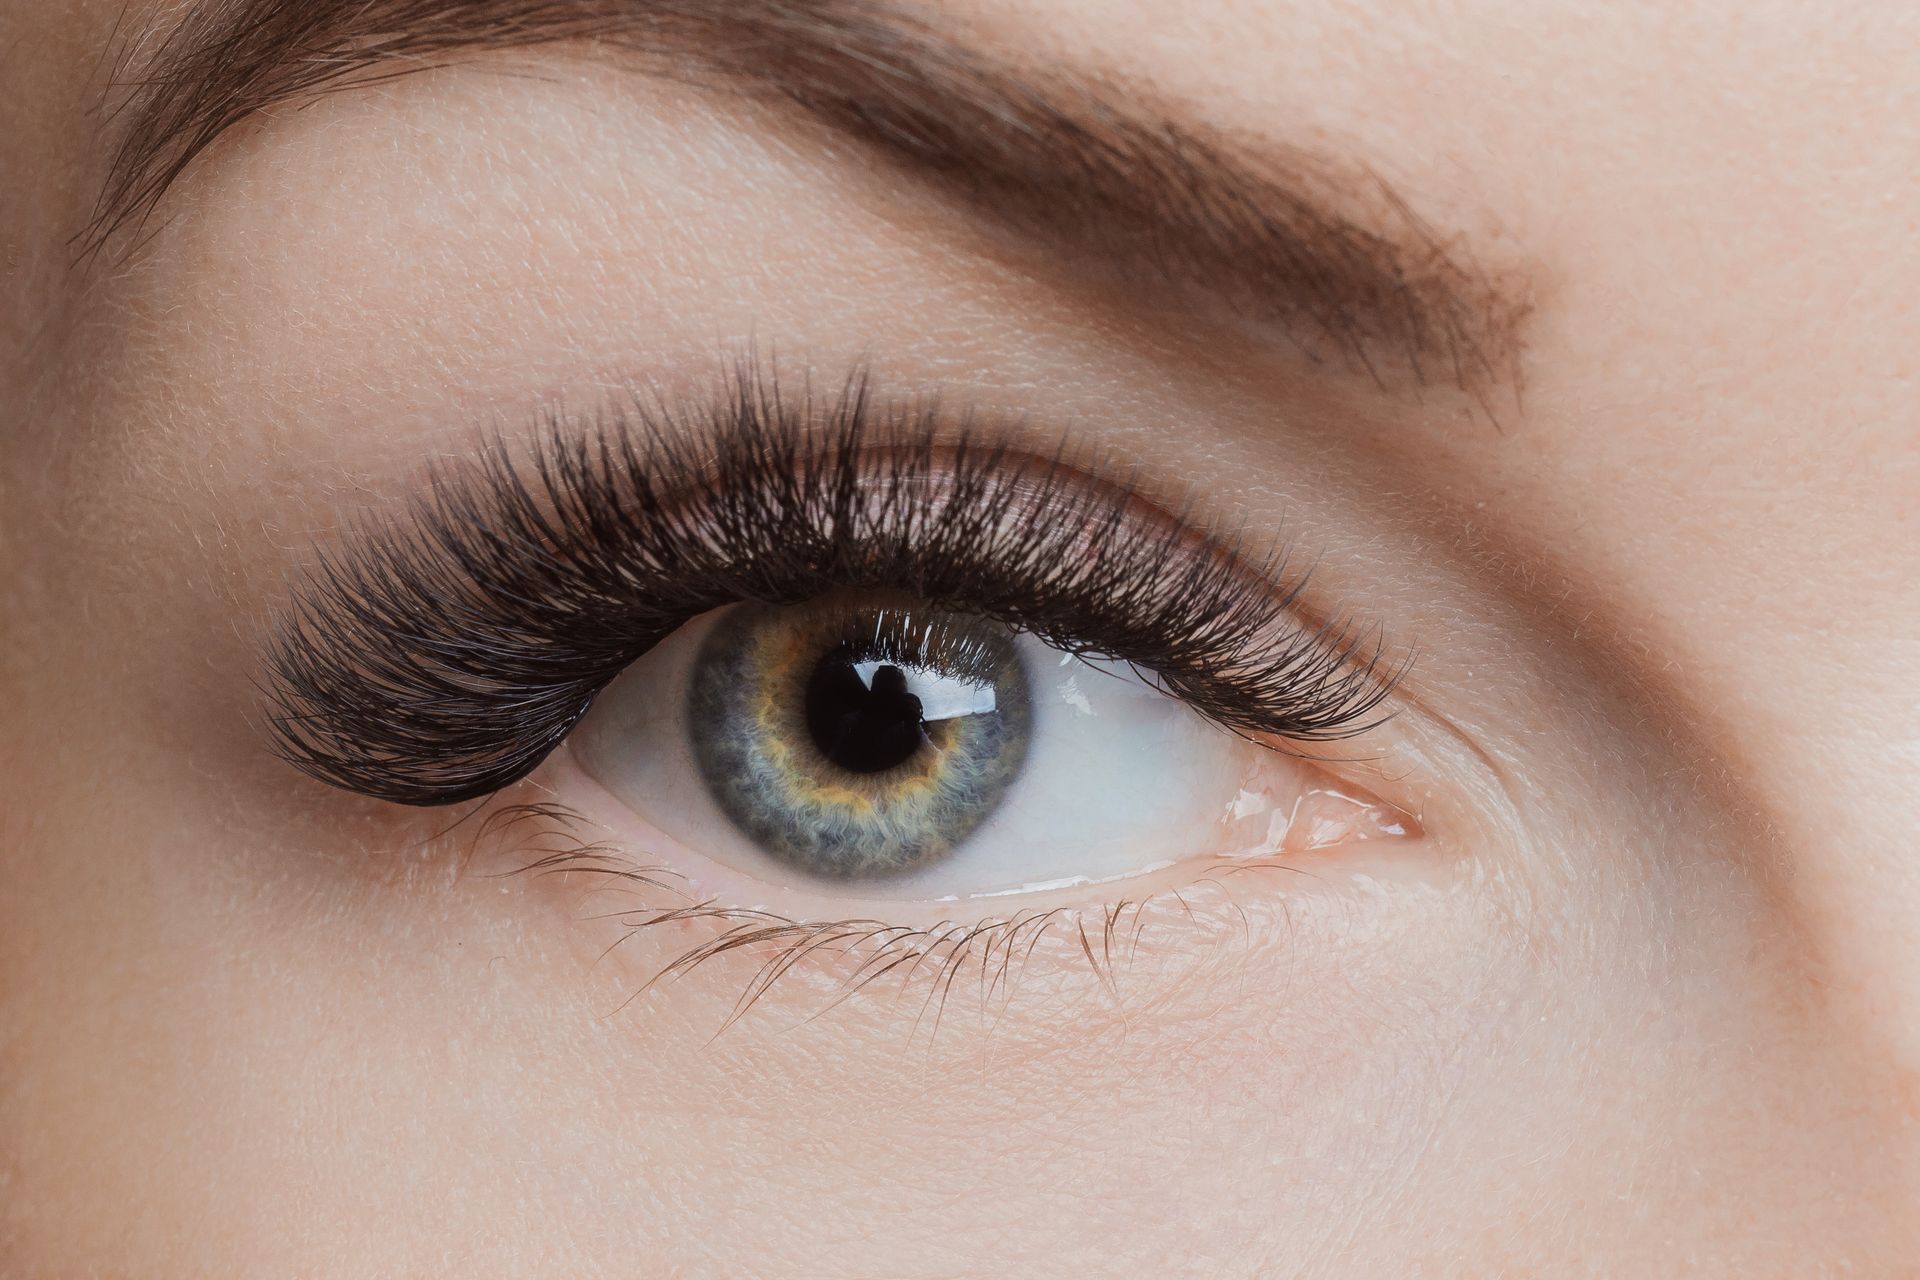 a close up of a woman's eye with long eyelashes